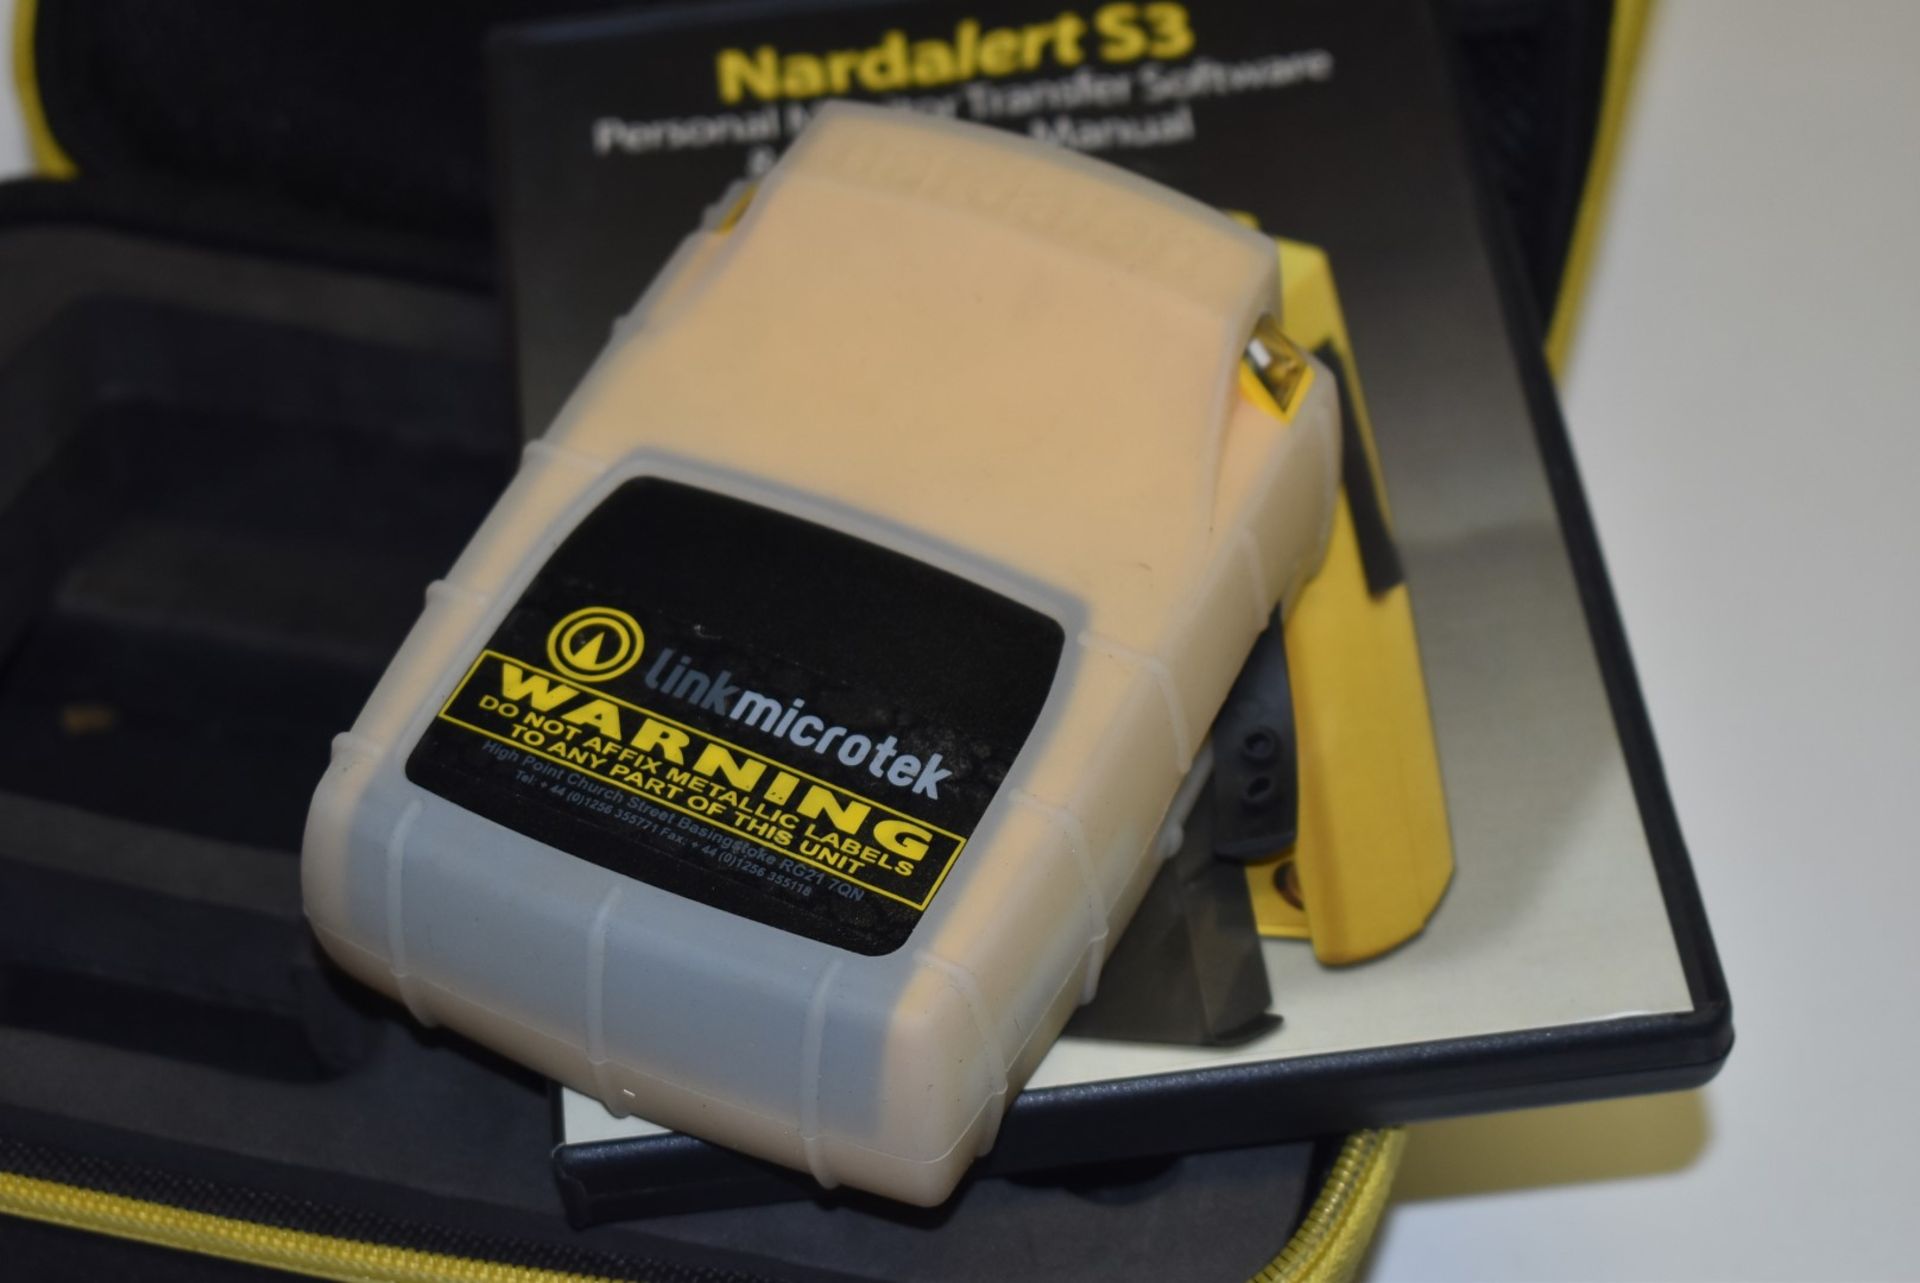 1 x Nardalert S3 None Ionizing Radiation Monitor - Model 2270/01 Mainframe - Includes Protection - Image 3 of 6